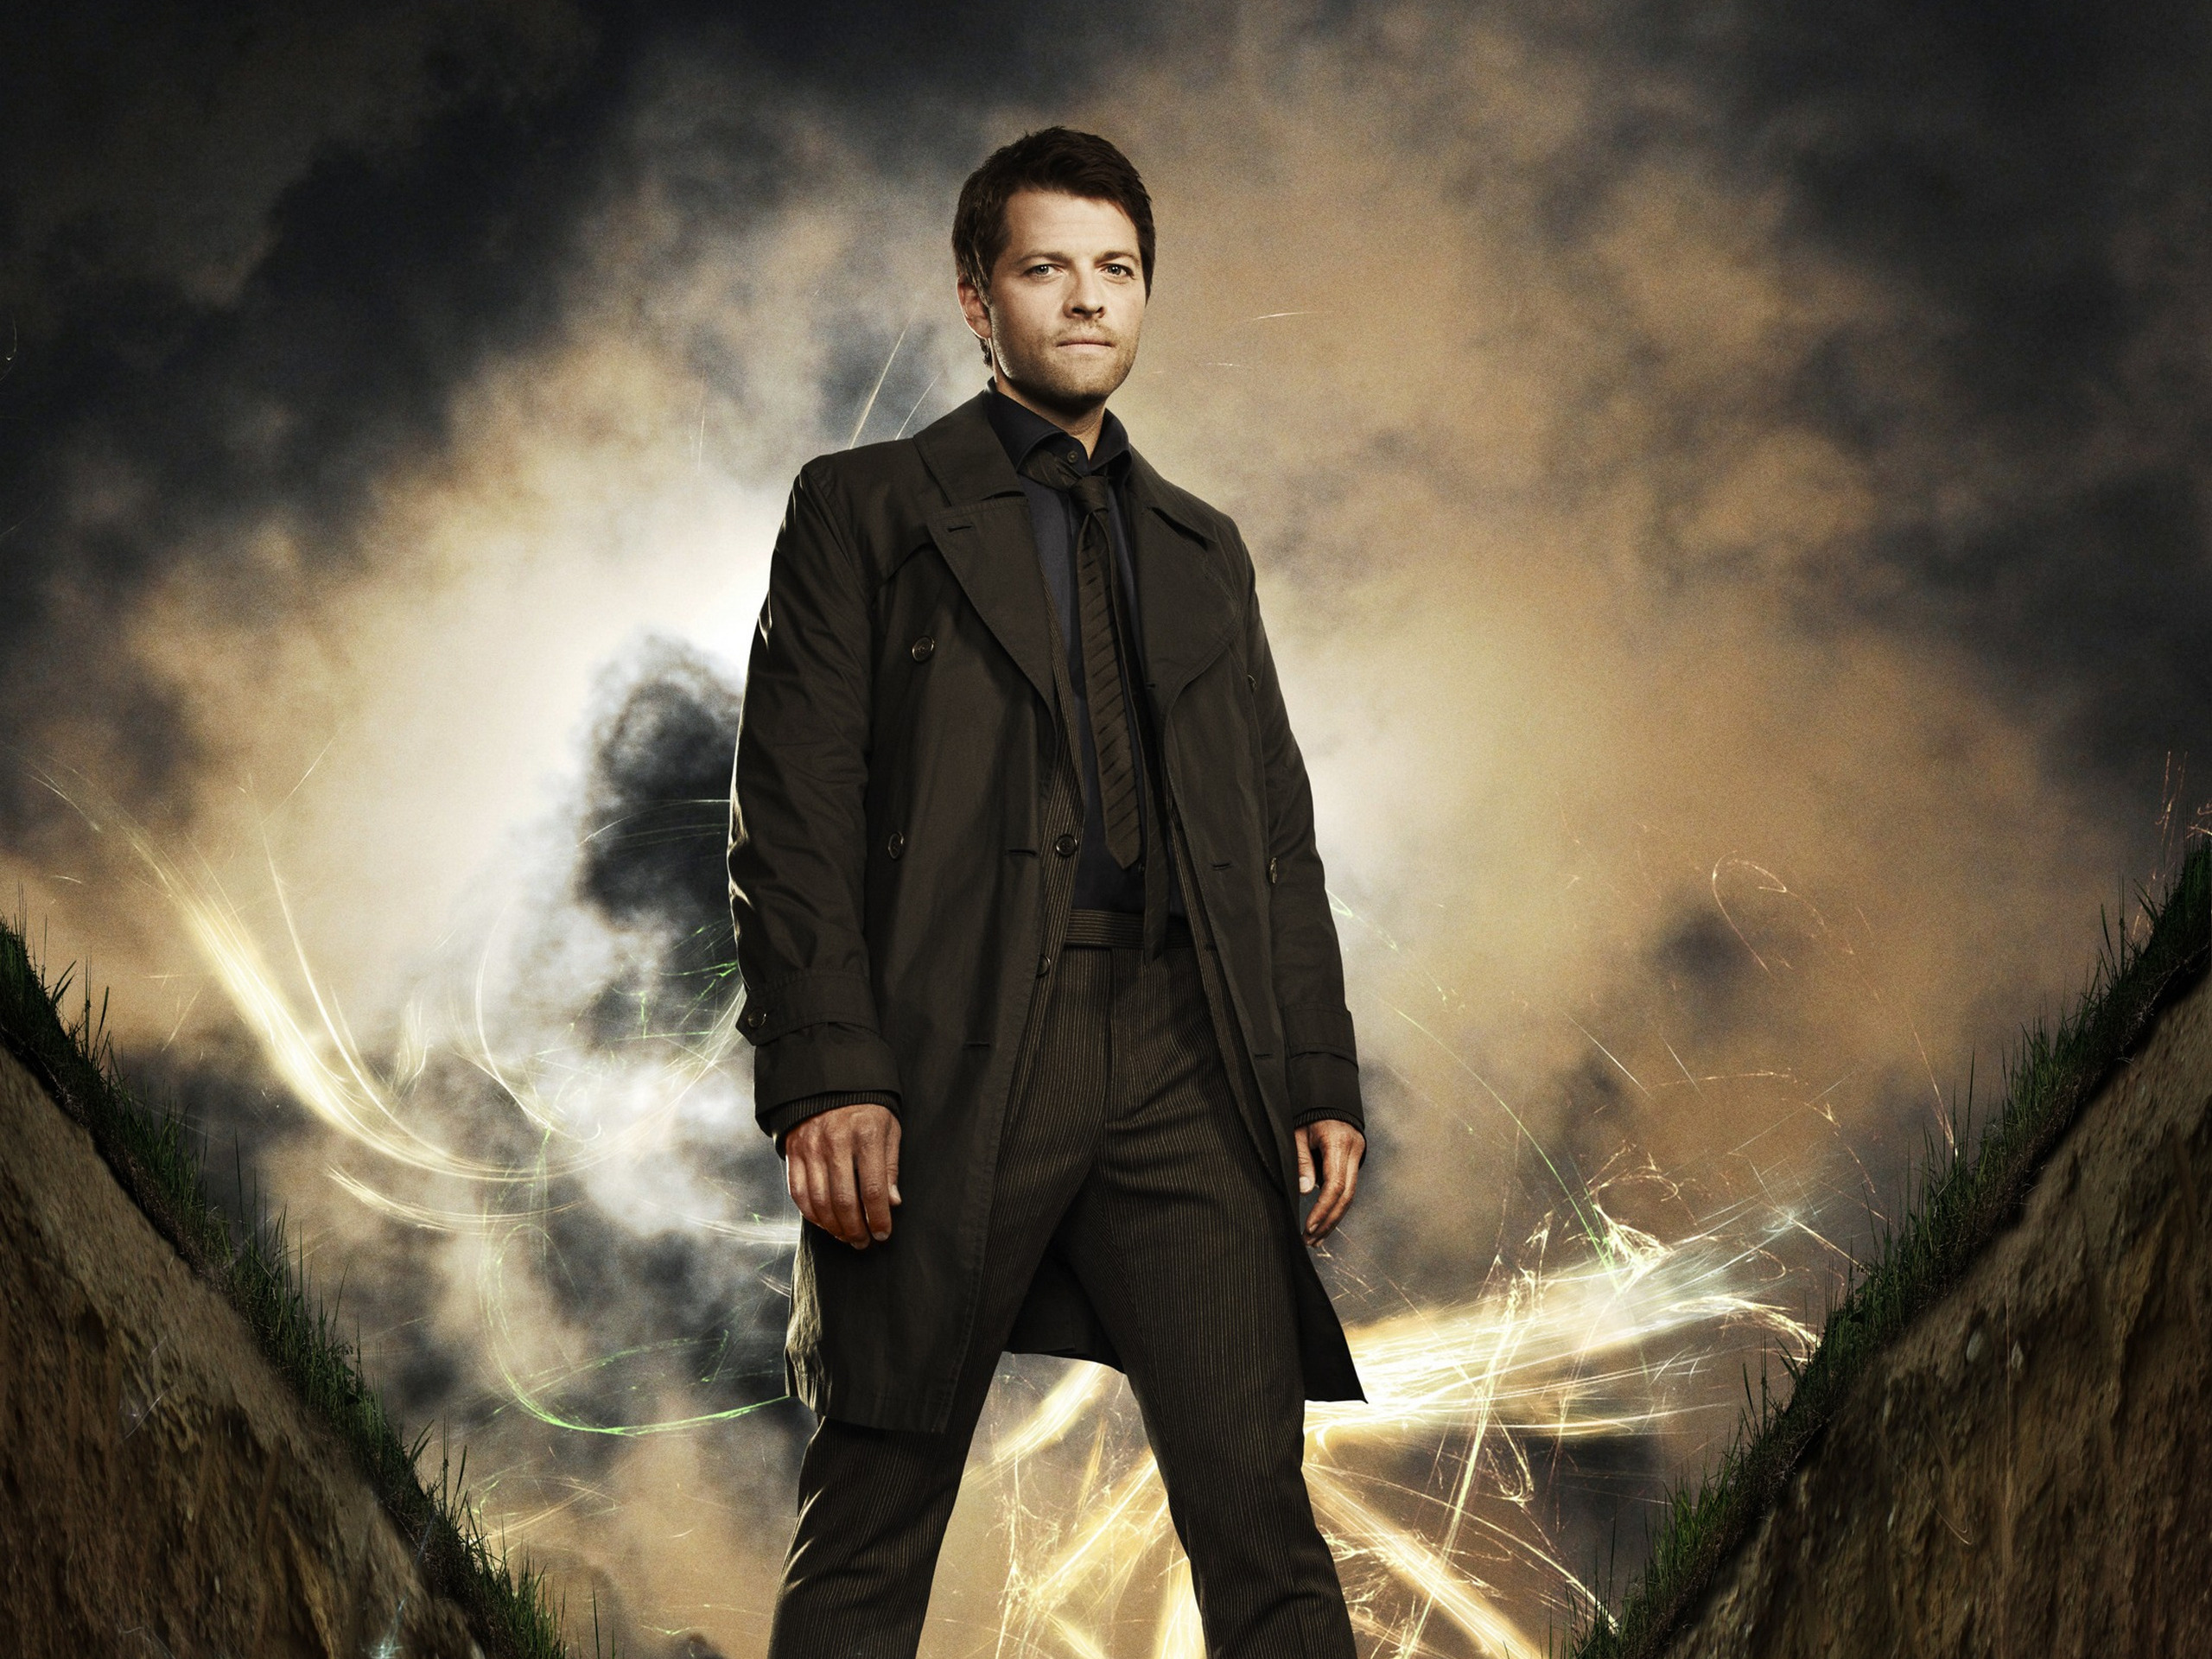 On August By Stephen Ments Off Misha Collins Wallpaper